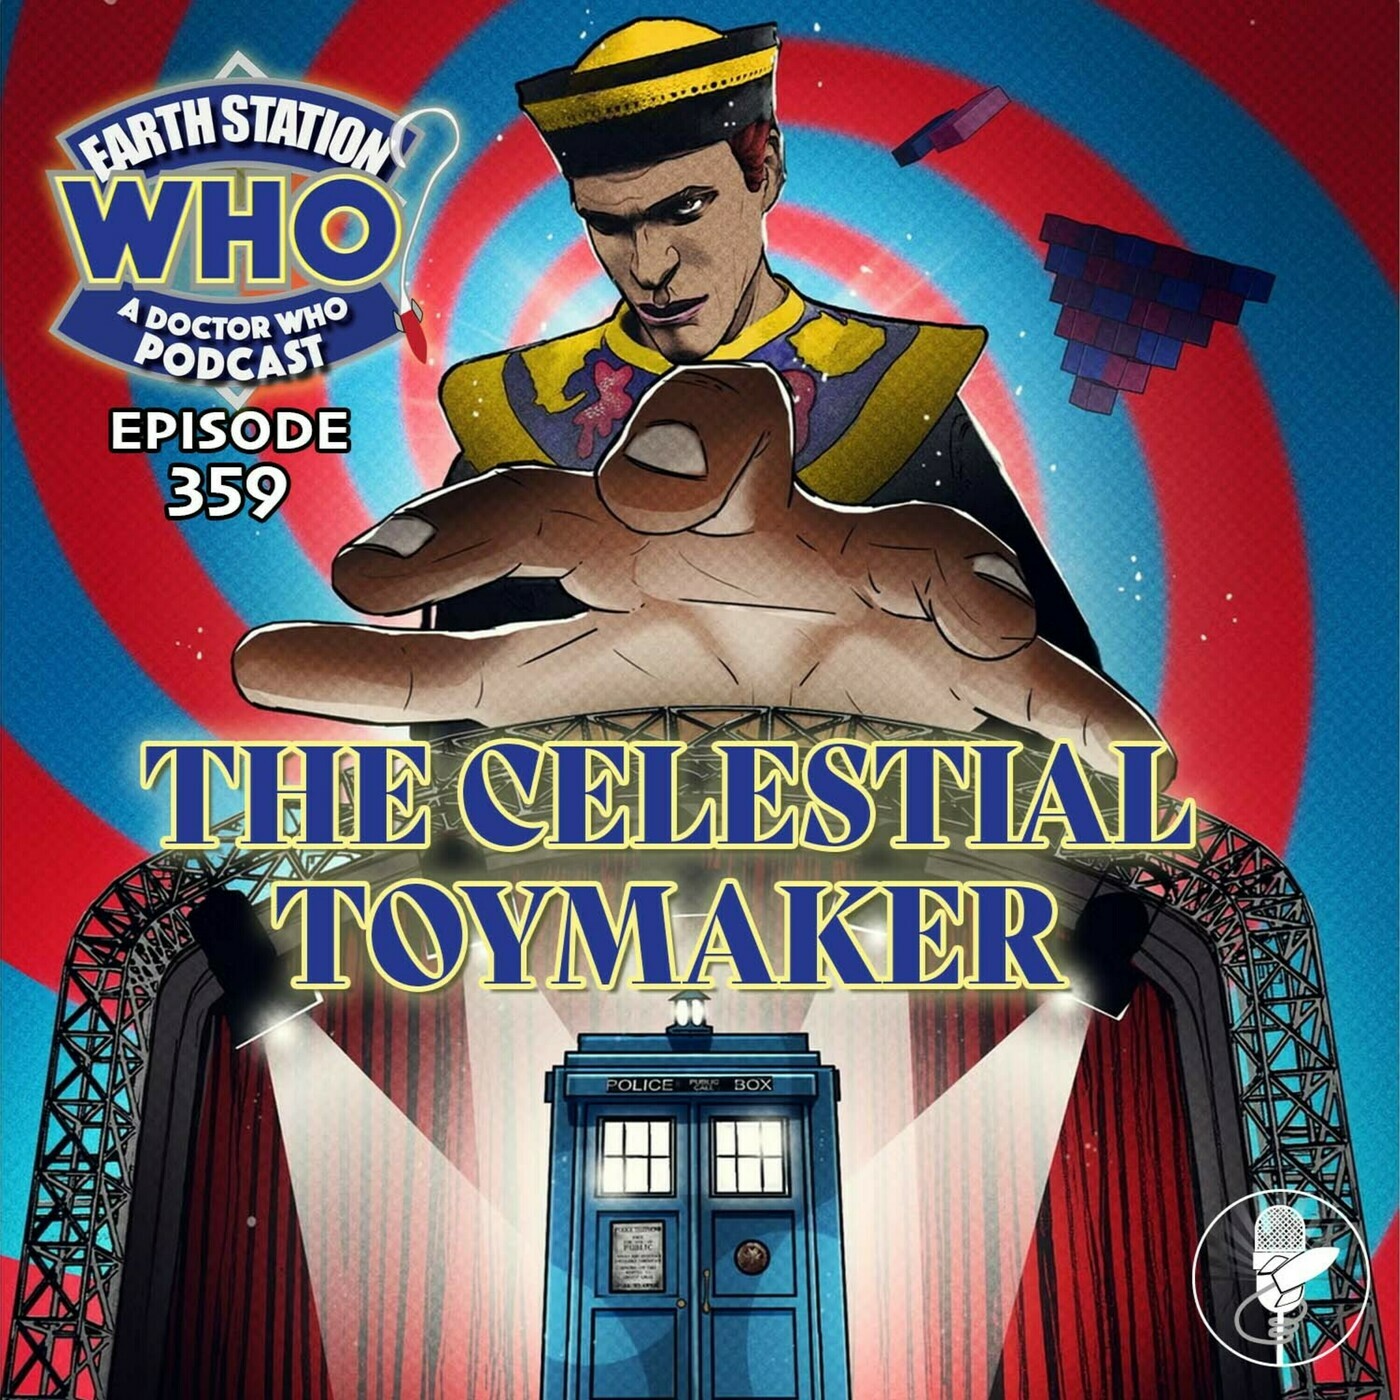 Earth Station Who: A Doctor Who Podcast celestialtoymaker: Doctor Who: The Celestial Toymaker Review